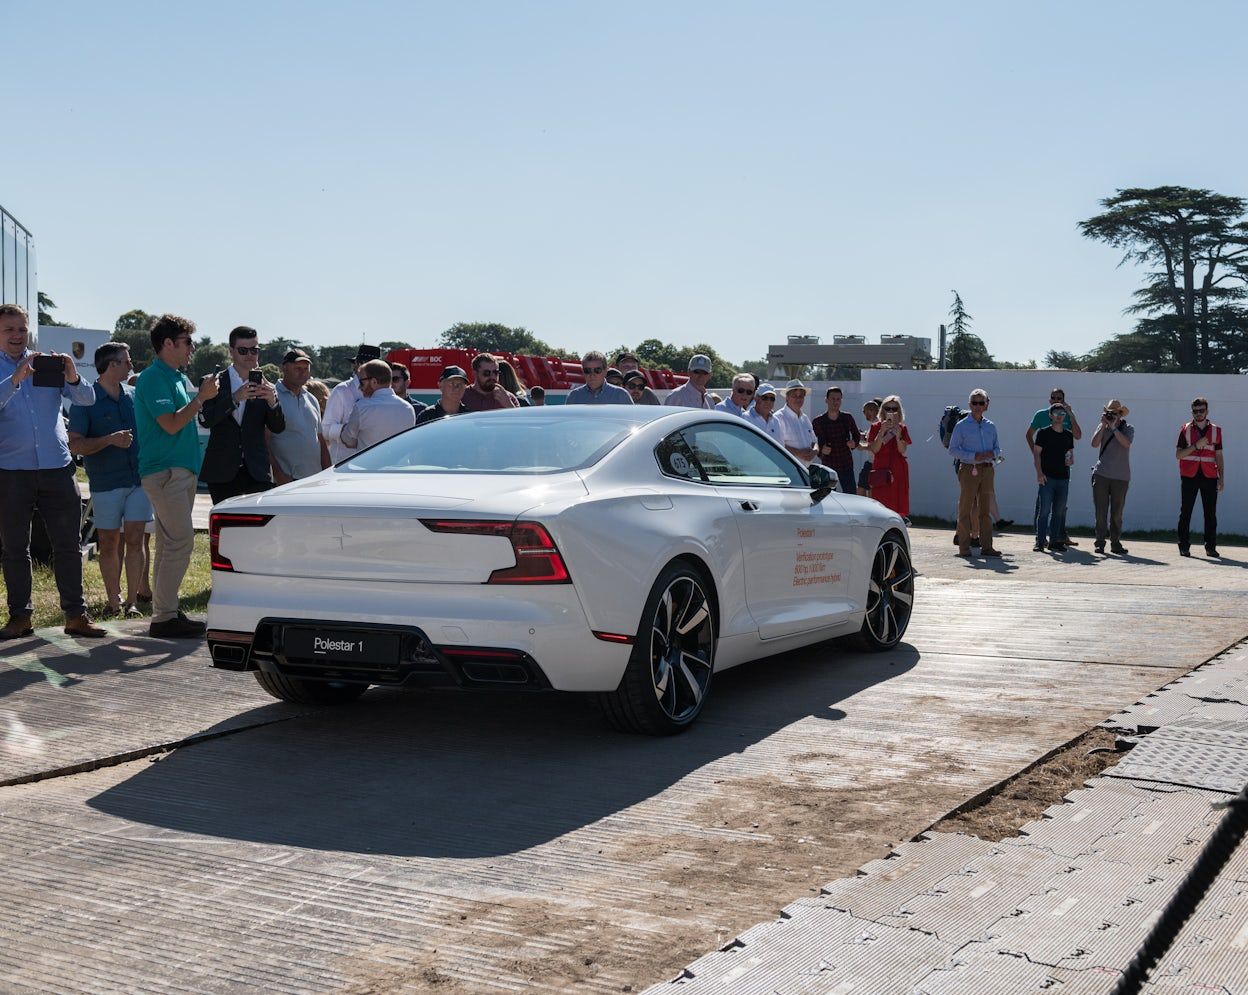 Crowd of spectators taking photos of a white Polestar 1 in a outdoor car show area.